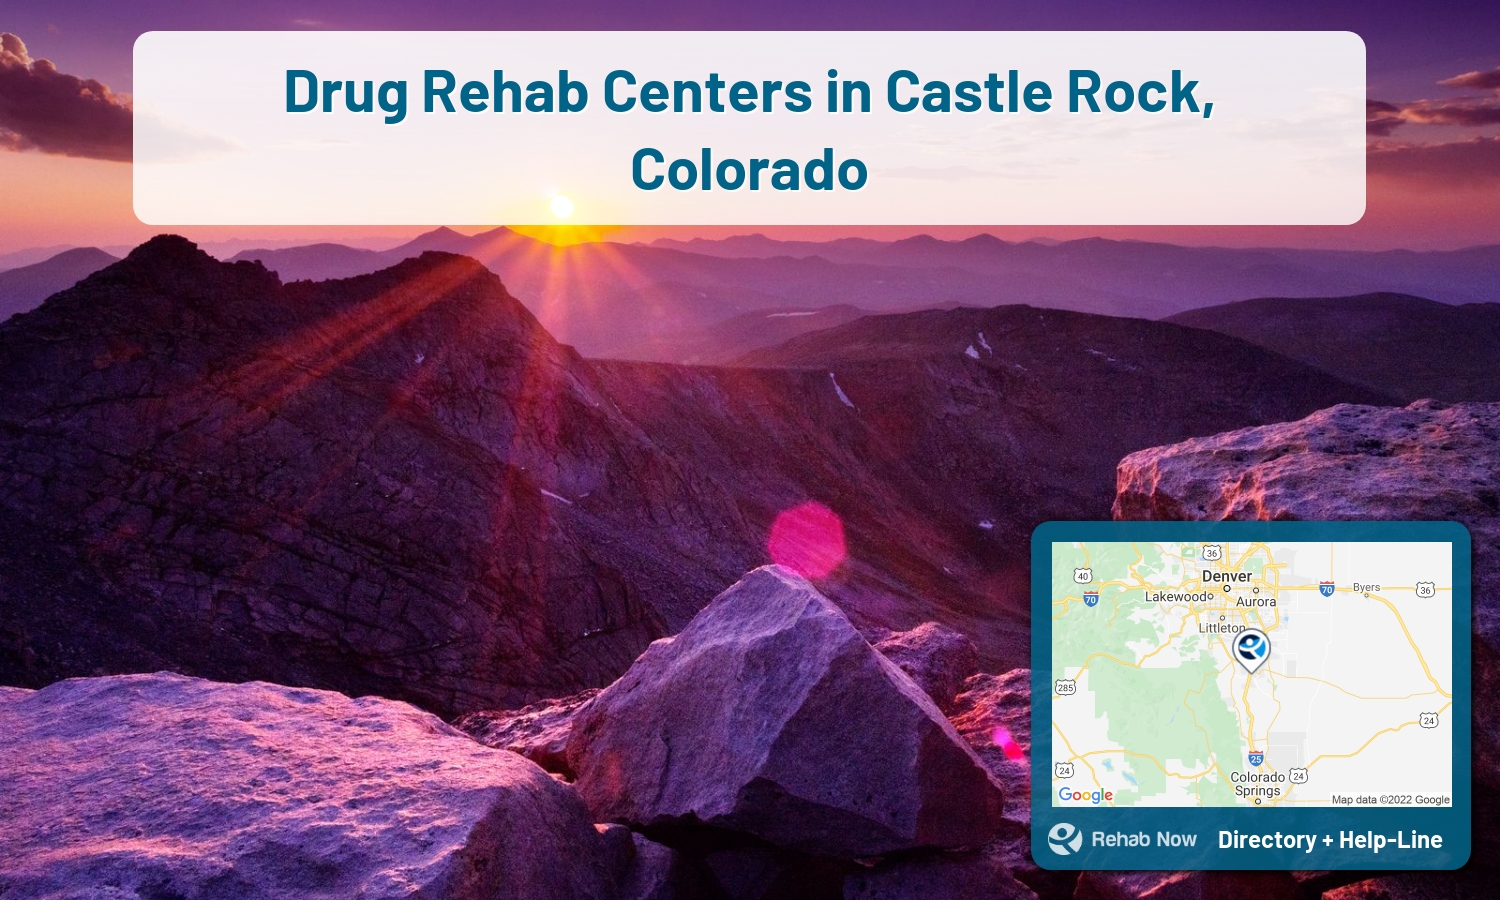 Let our expert counselors help find the best addiction treatment in Castle Rock, Colorado now with a free call to our hotline.